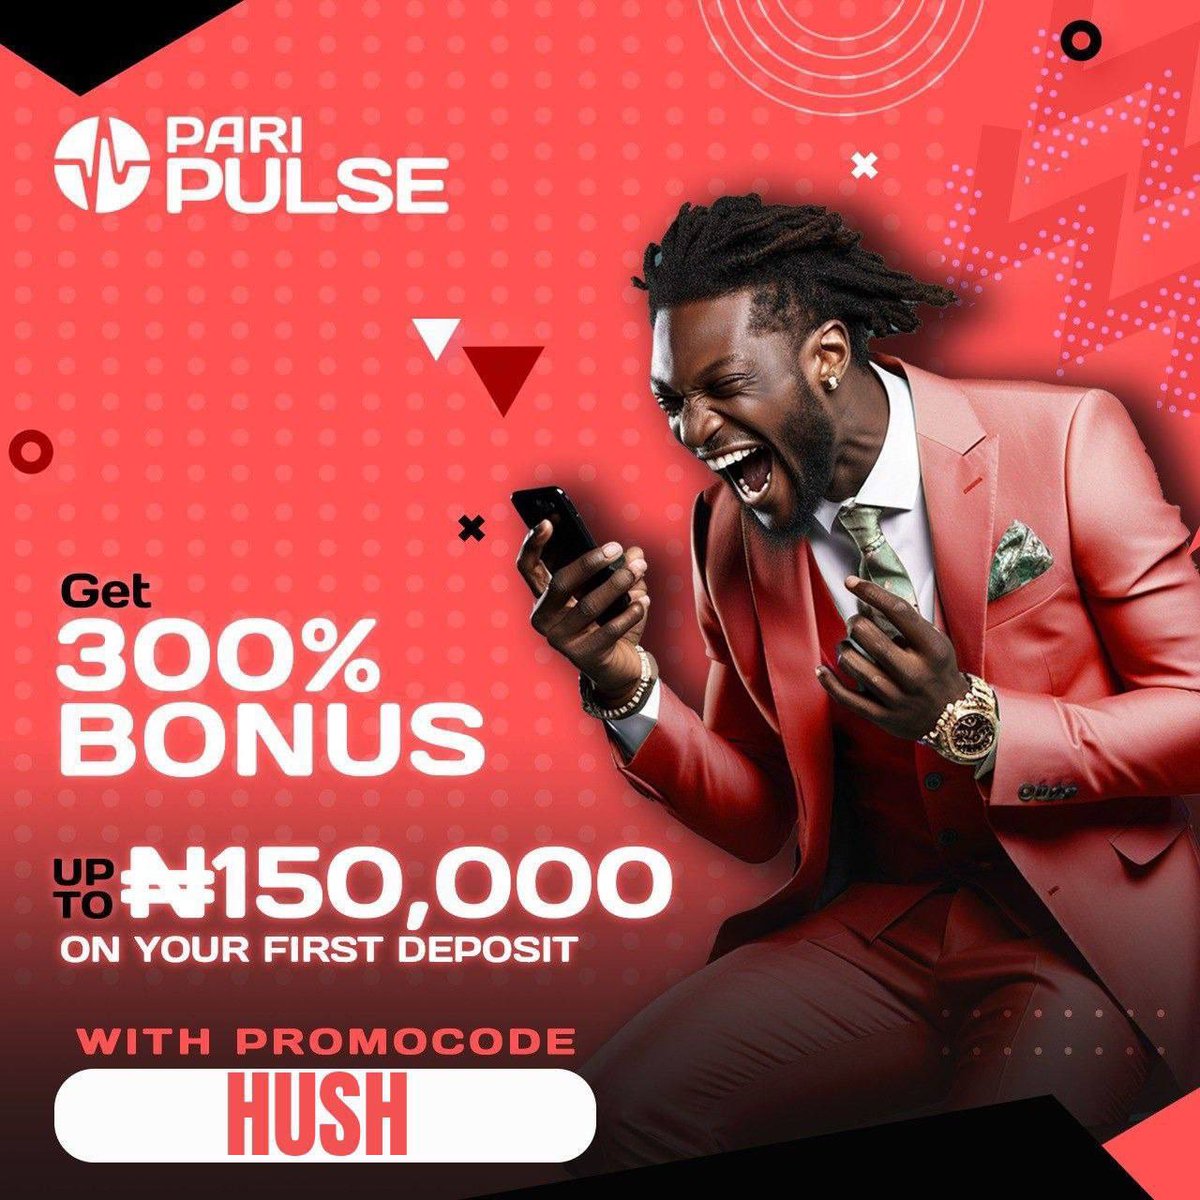 2 odds on Paripulse Code : VYY4V Get a 300% welcome bonus on your first deposit when you sign up as a new customer Don't have an account Sign up now 👉 pari-pulse.com/Ojhs Promocode : HUSH